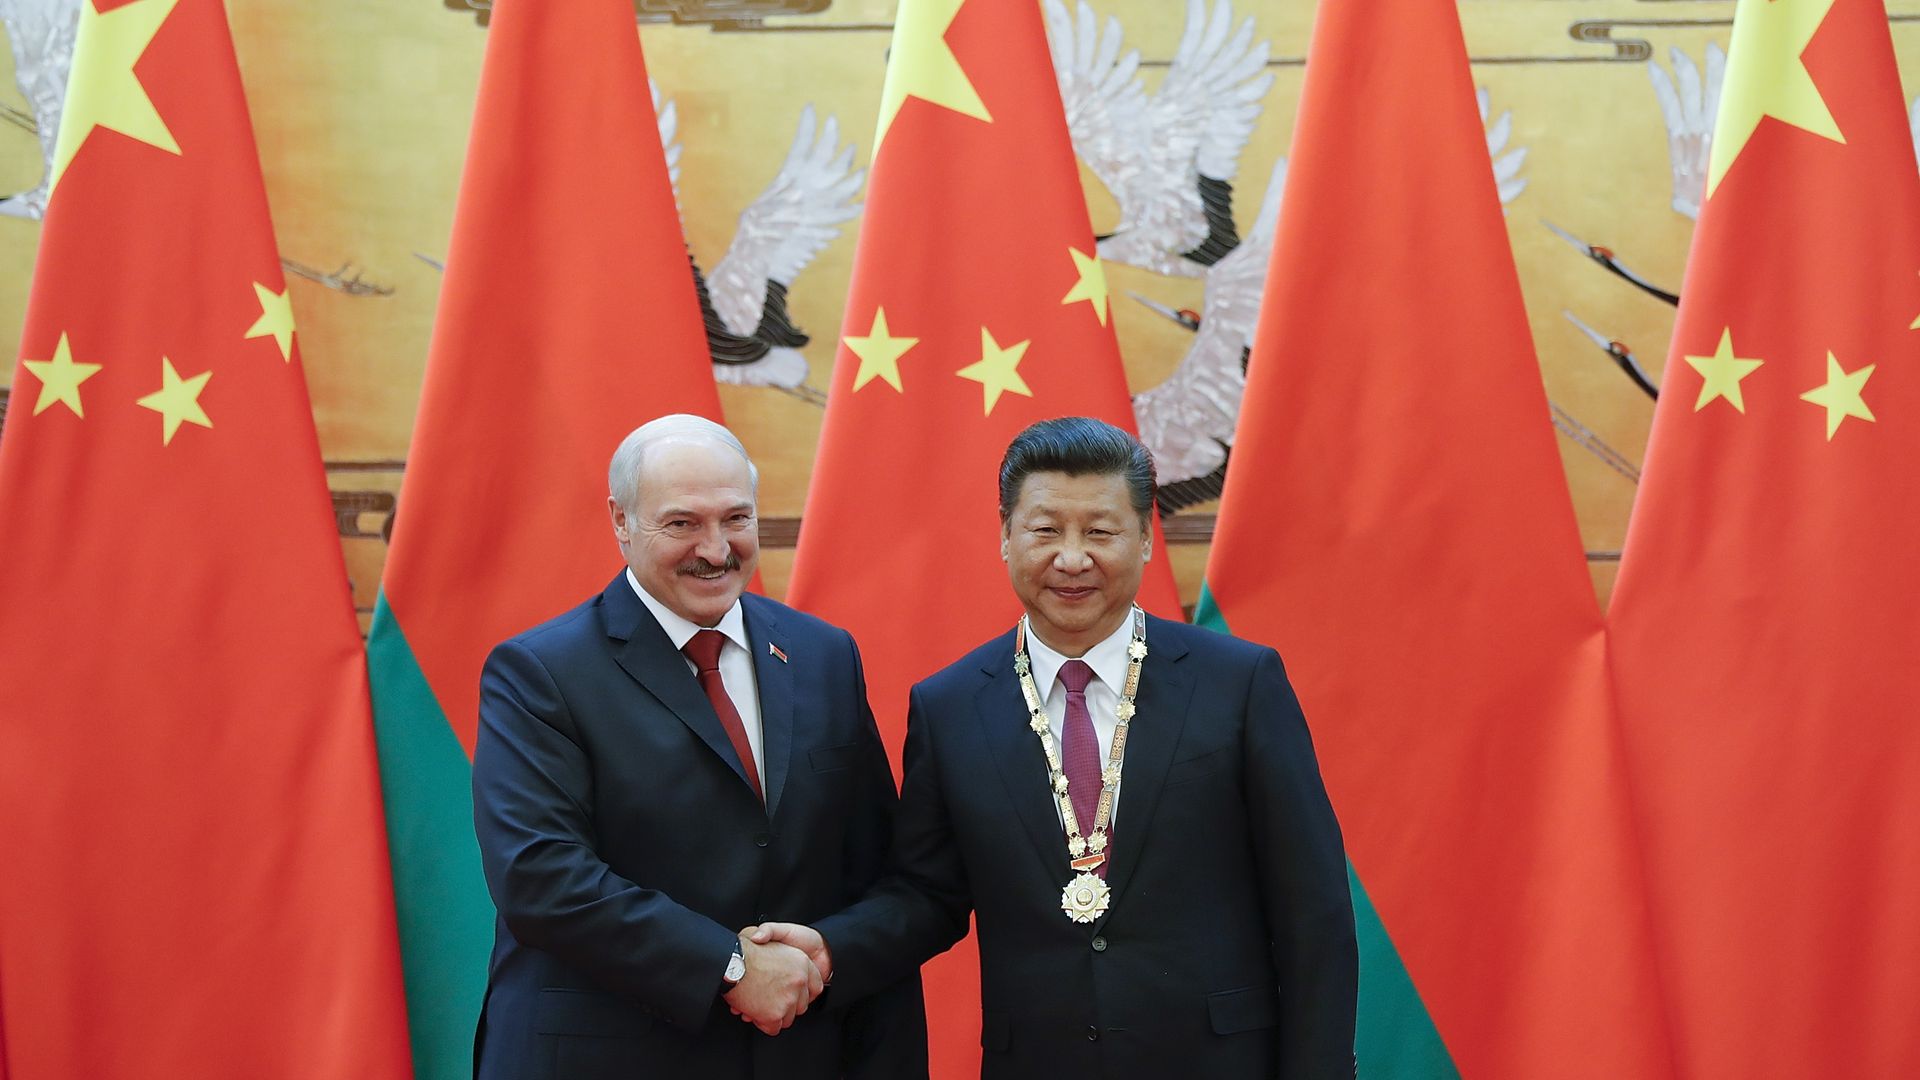 At the invitation of President Xi Jinping, Alexander Lukaschenko, the President of the Republic of Belarus will pay a state visit to China from Sep. 28 to 30